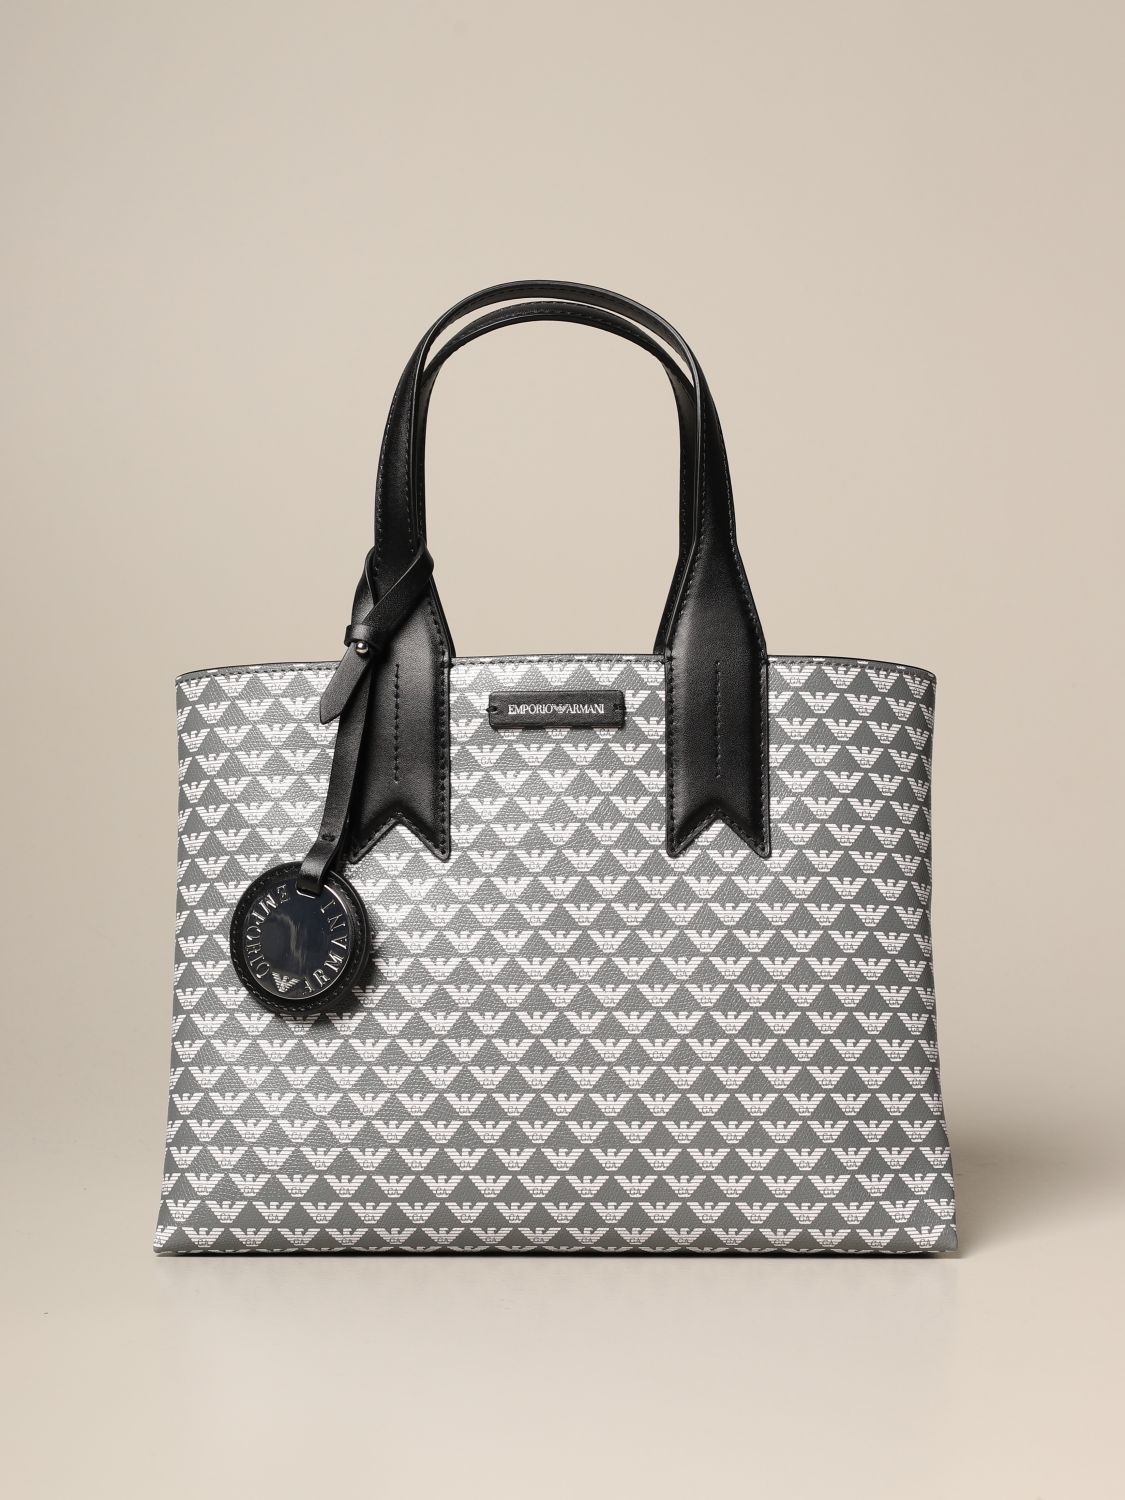 Egern lindring Udelukke Emporio Armani Outlet: handbag with all over logo | Tote Bags Emporio Armani  Women Grey | Tote Bags Emporio Armani Y3D153 YFG5E GIGLIO.COM